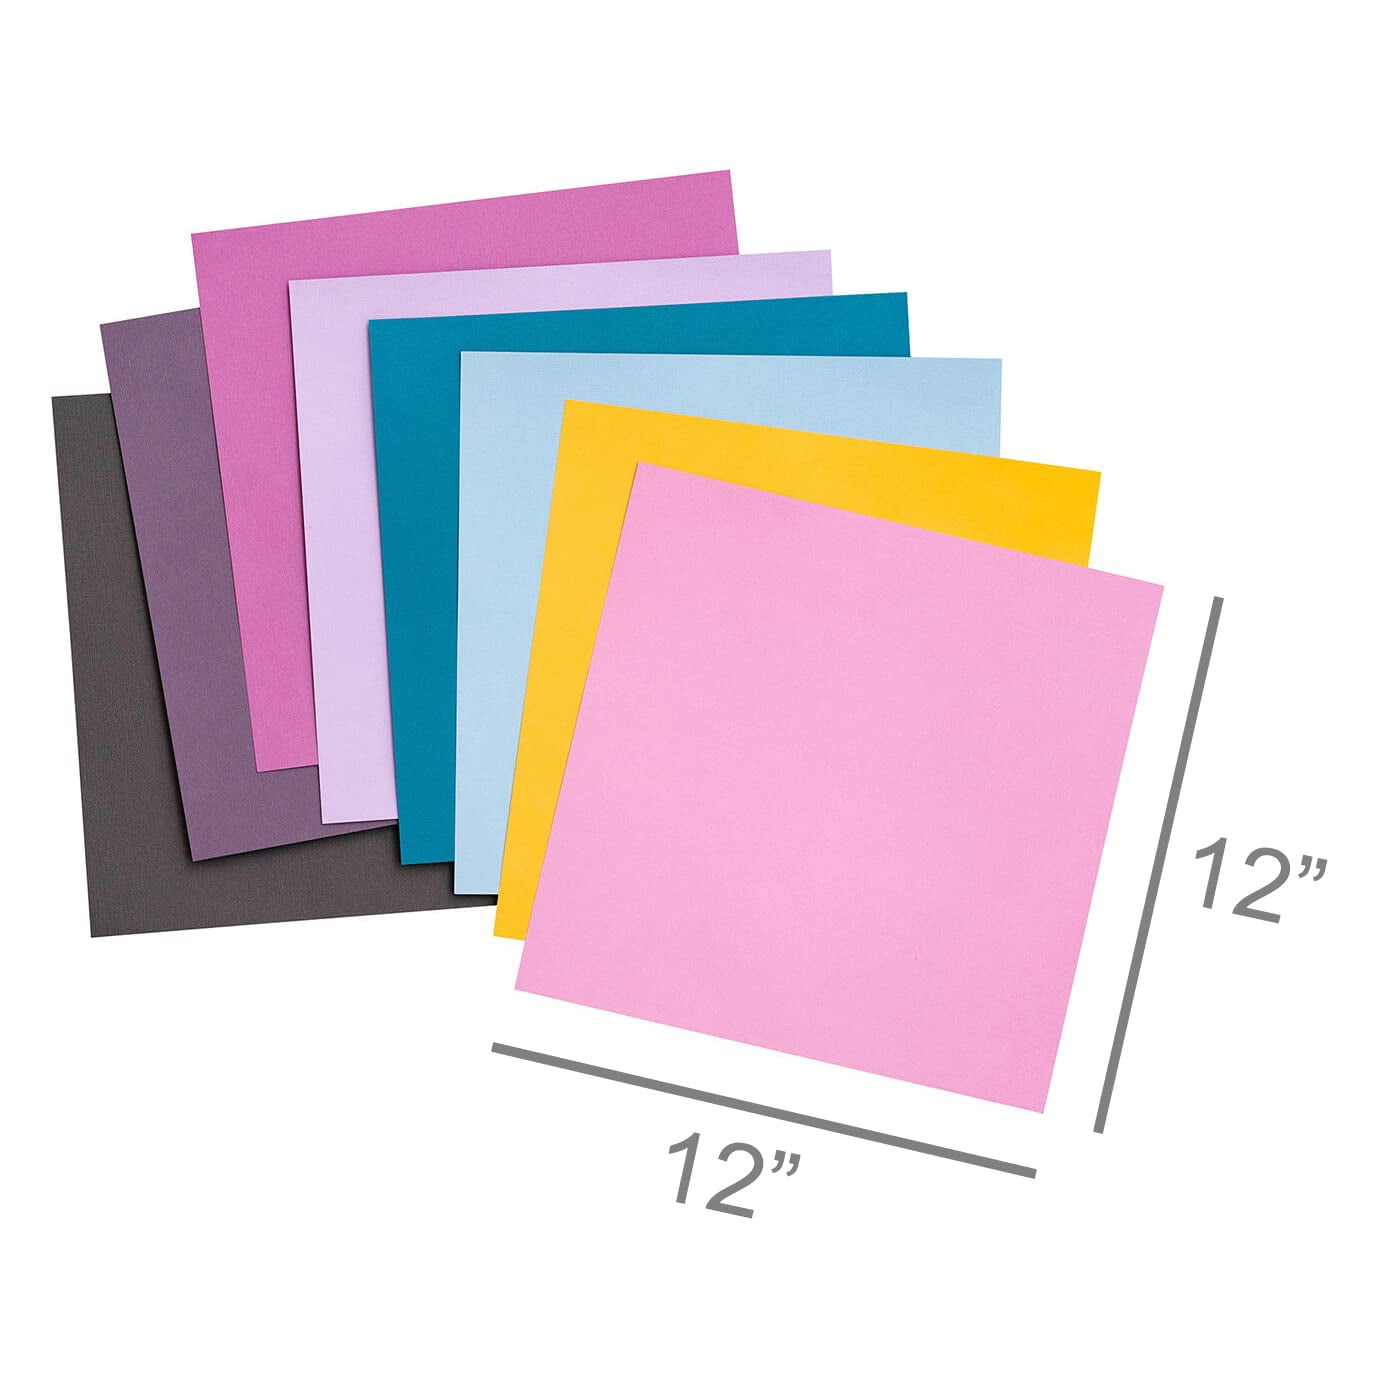 Burano CYCLAMEN PINK (58) - 12X12 Cardstock Paper - 92lb Cover (250gsm) - 5